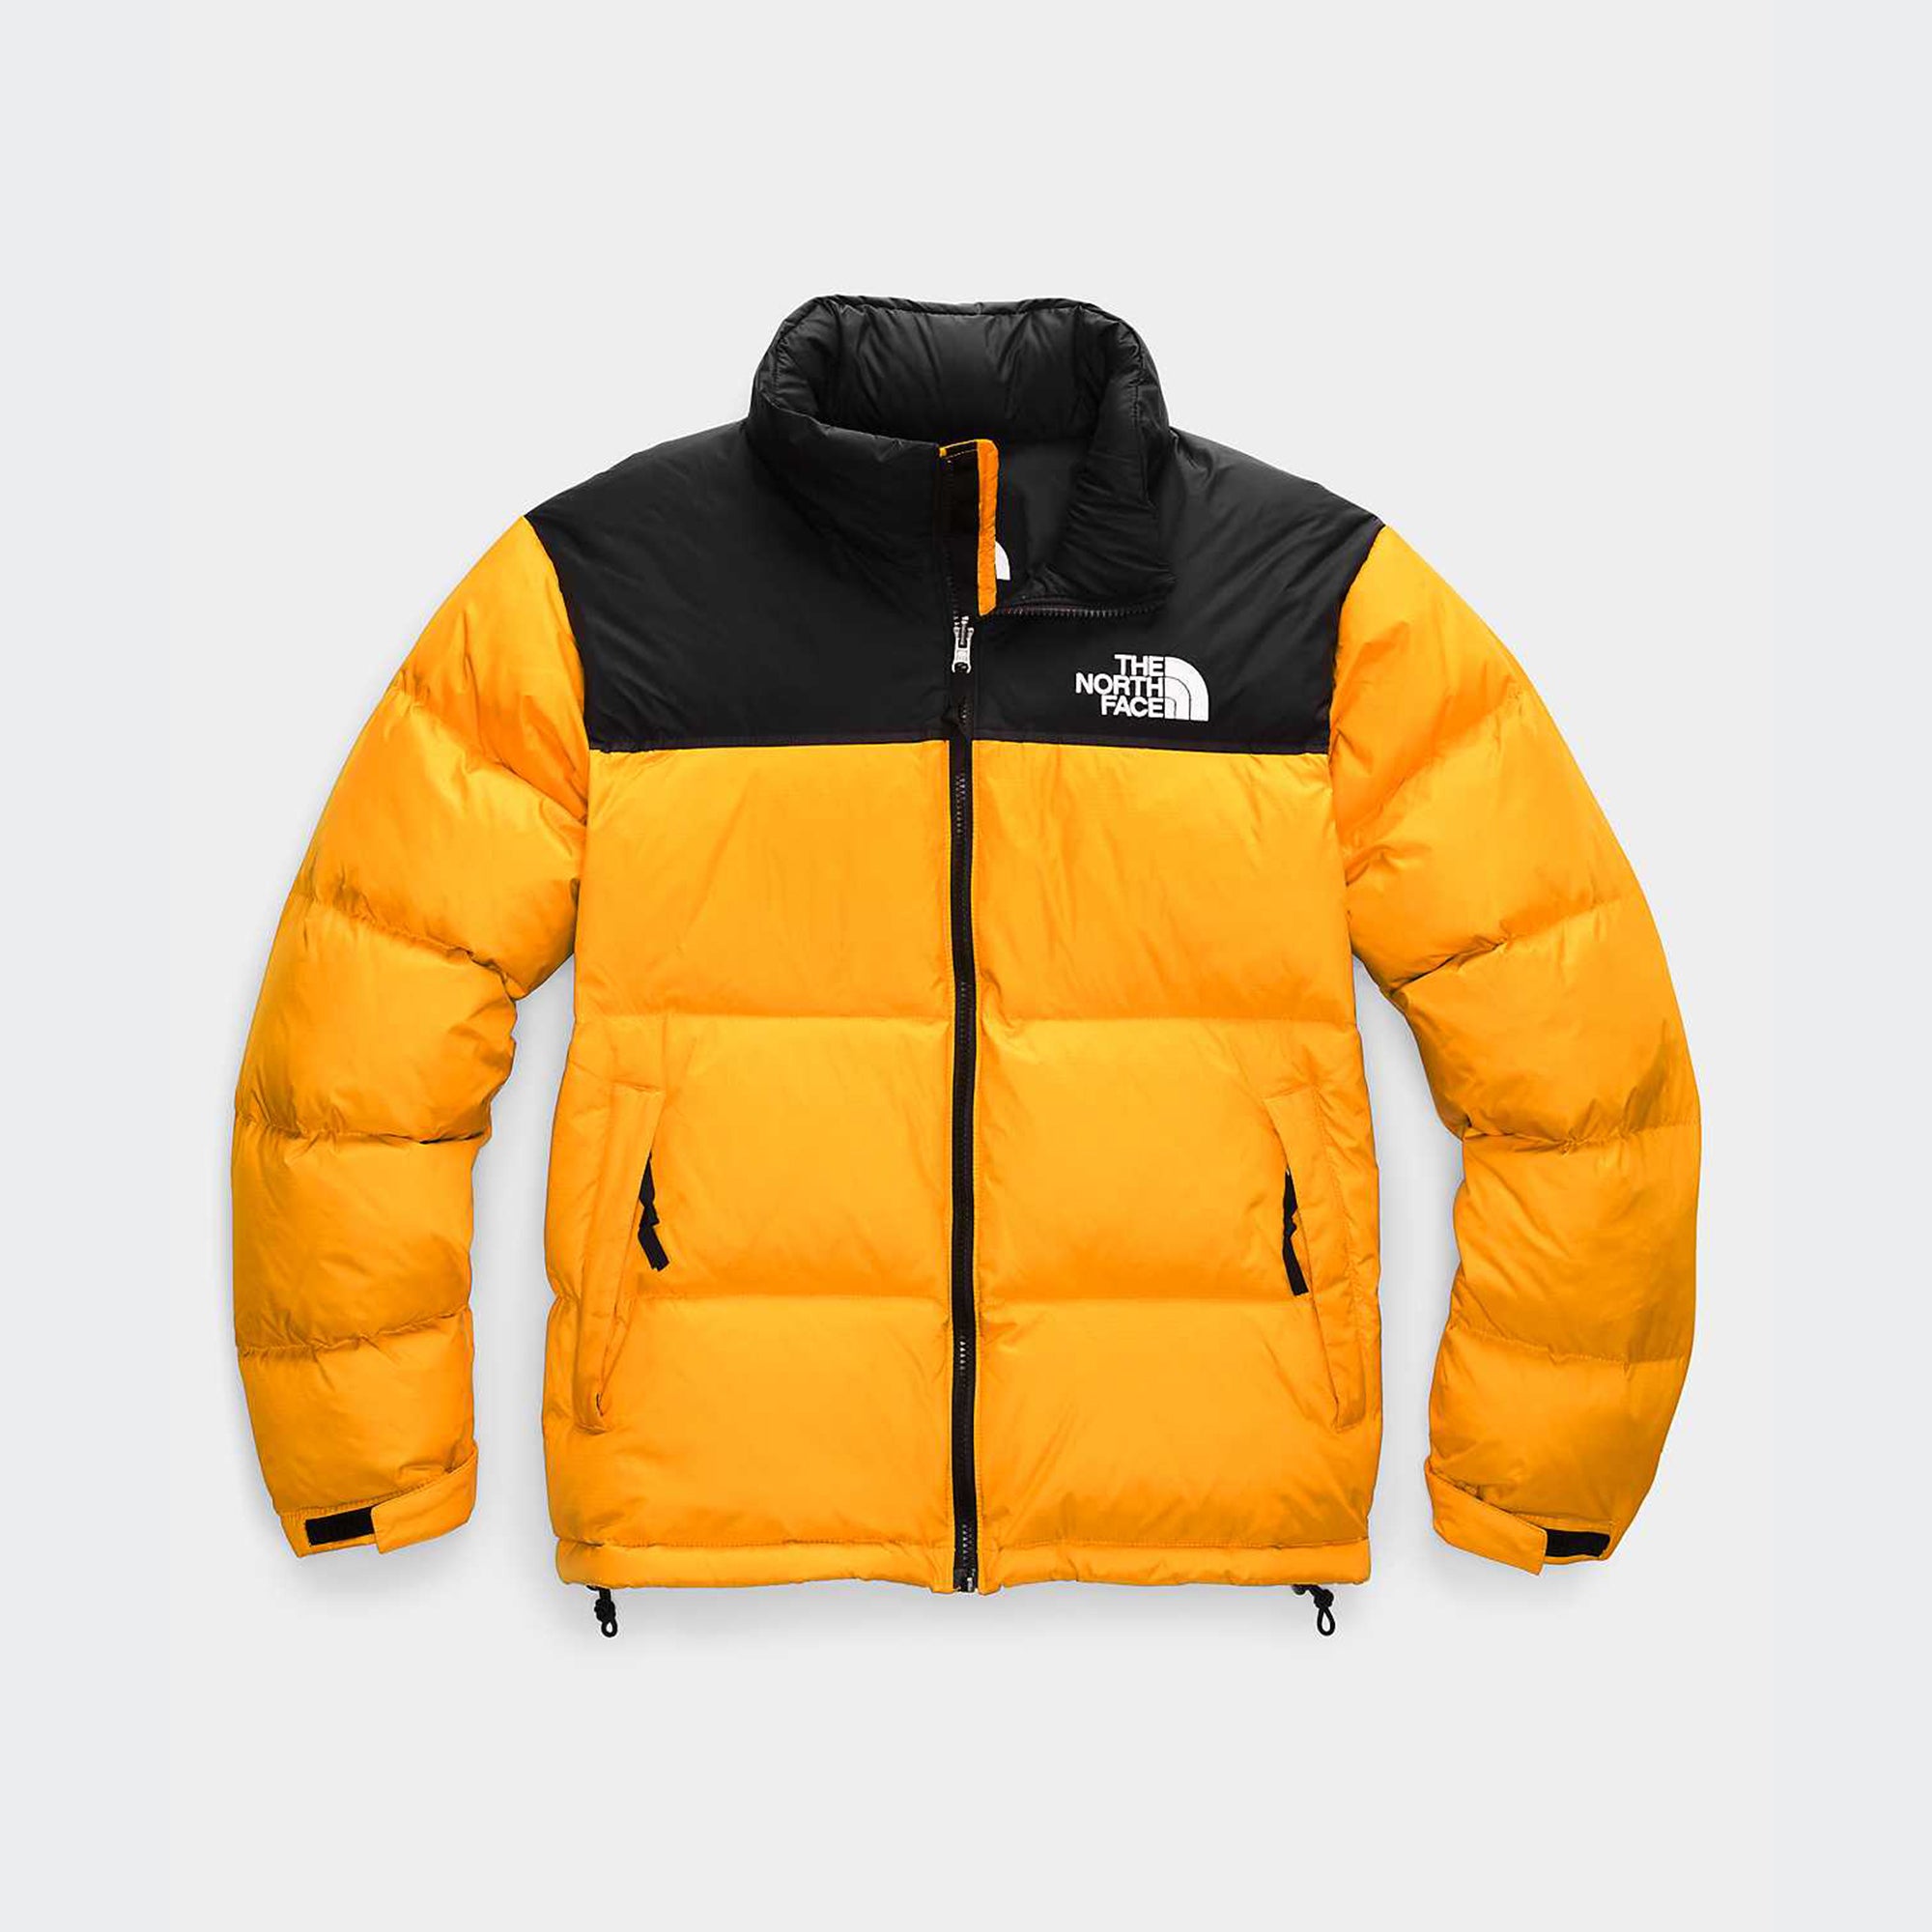 men's the north face jacket